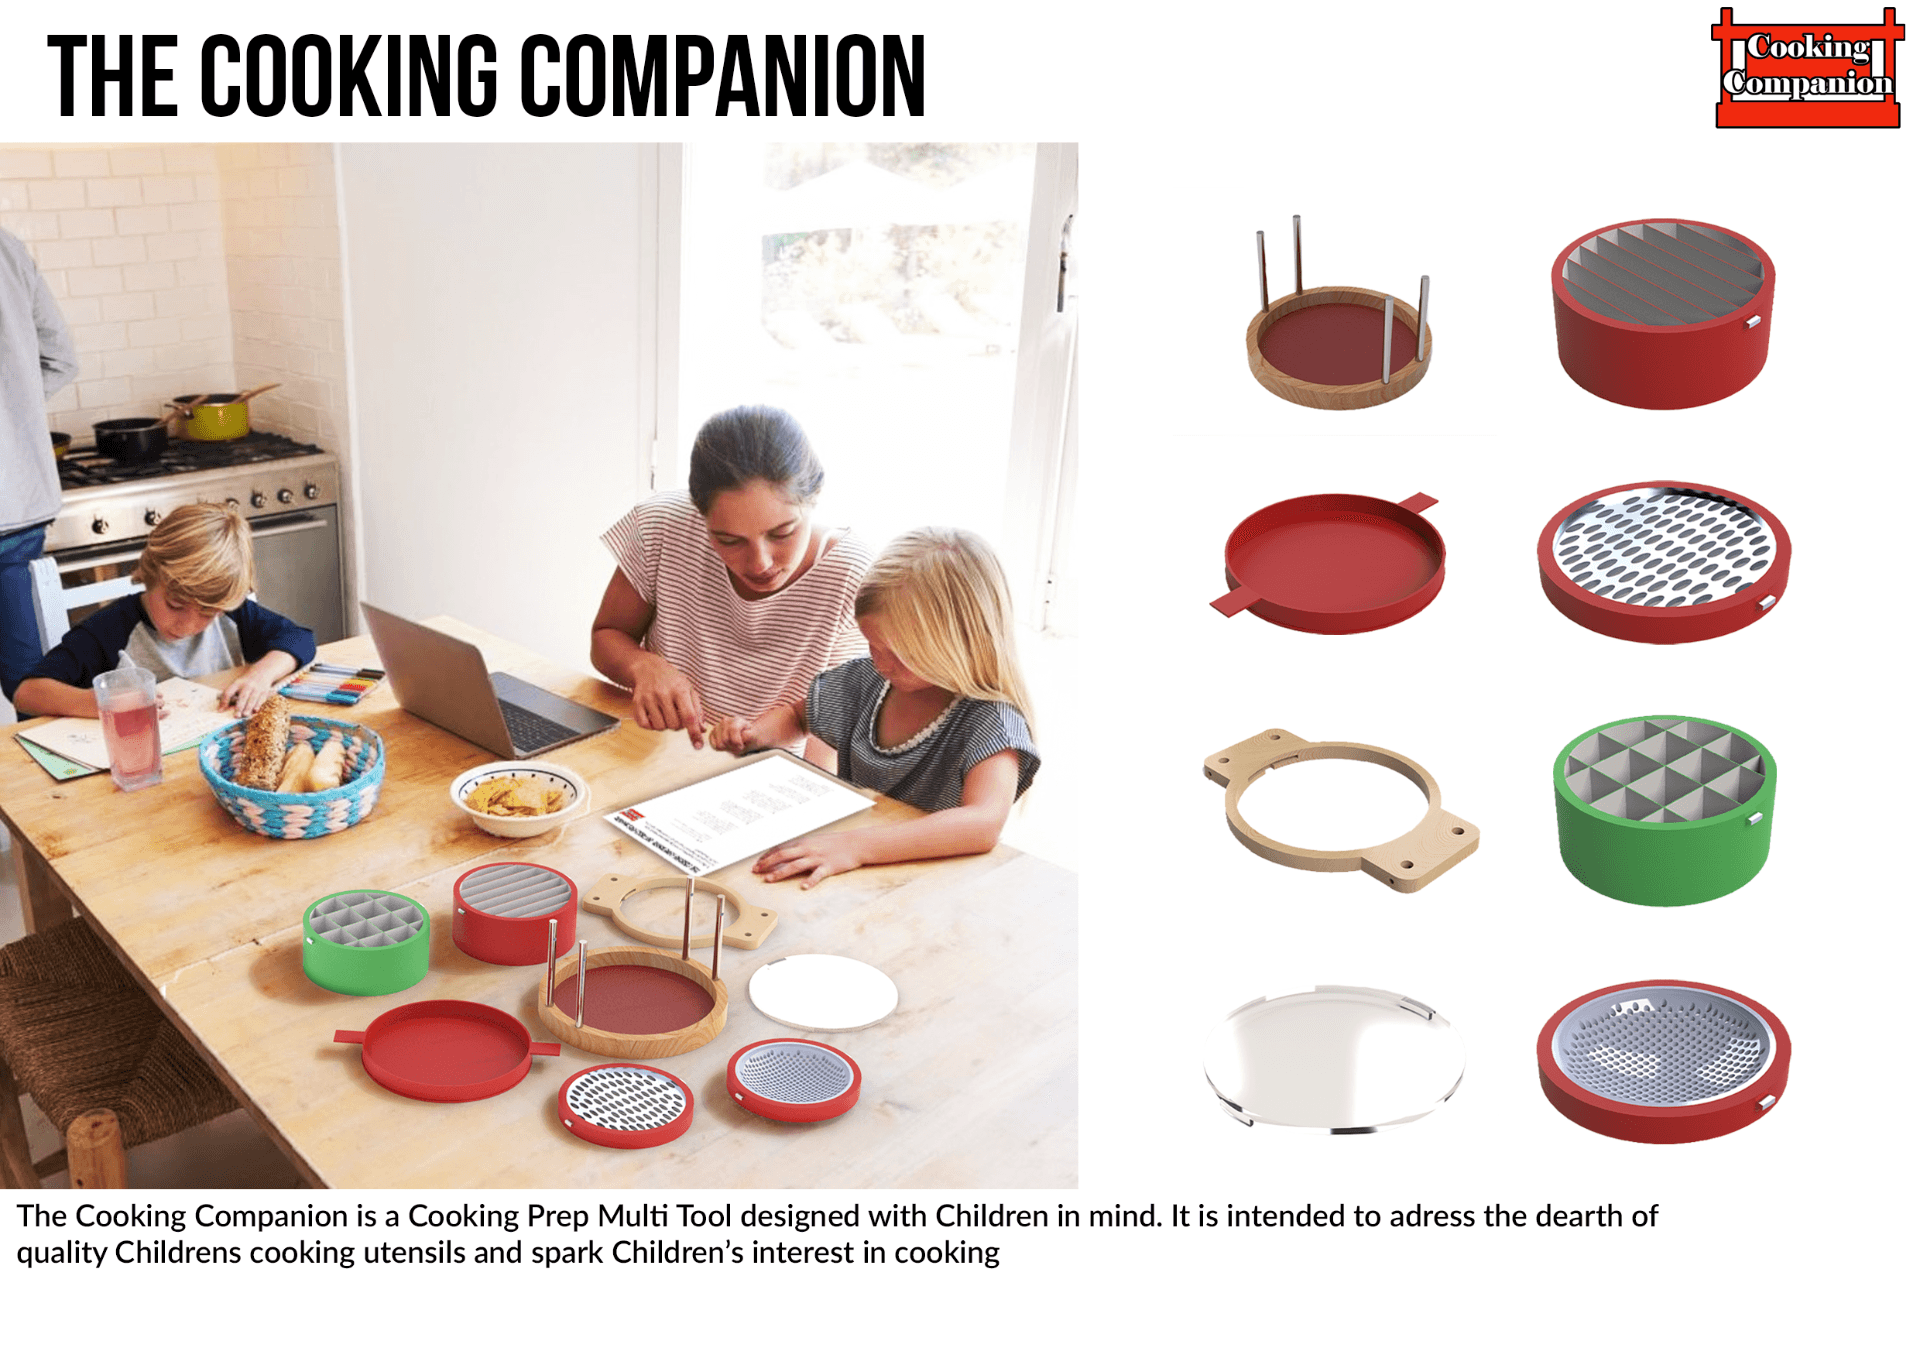 The Cooking Companion